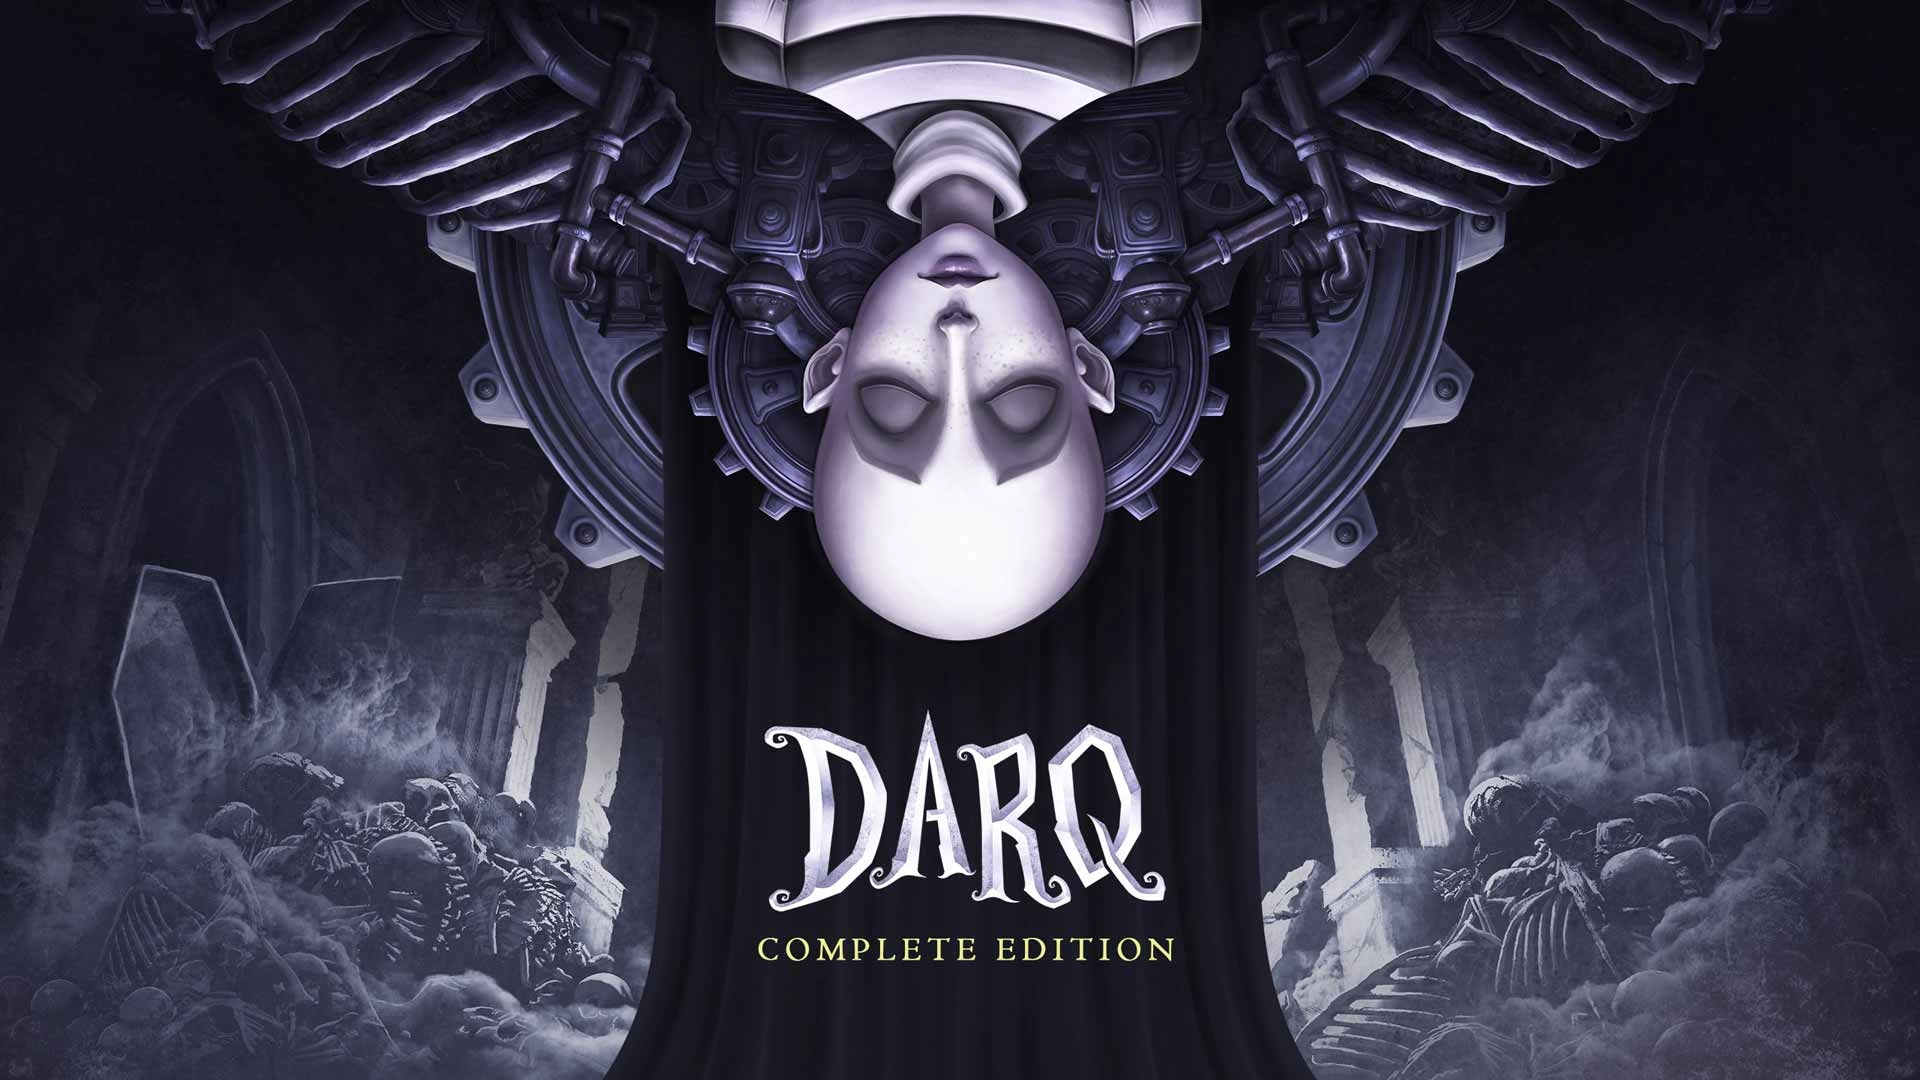 DARQ: Complete Edition is free at Epic Games Store